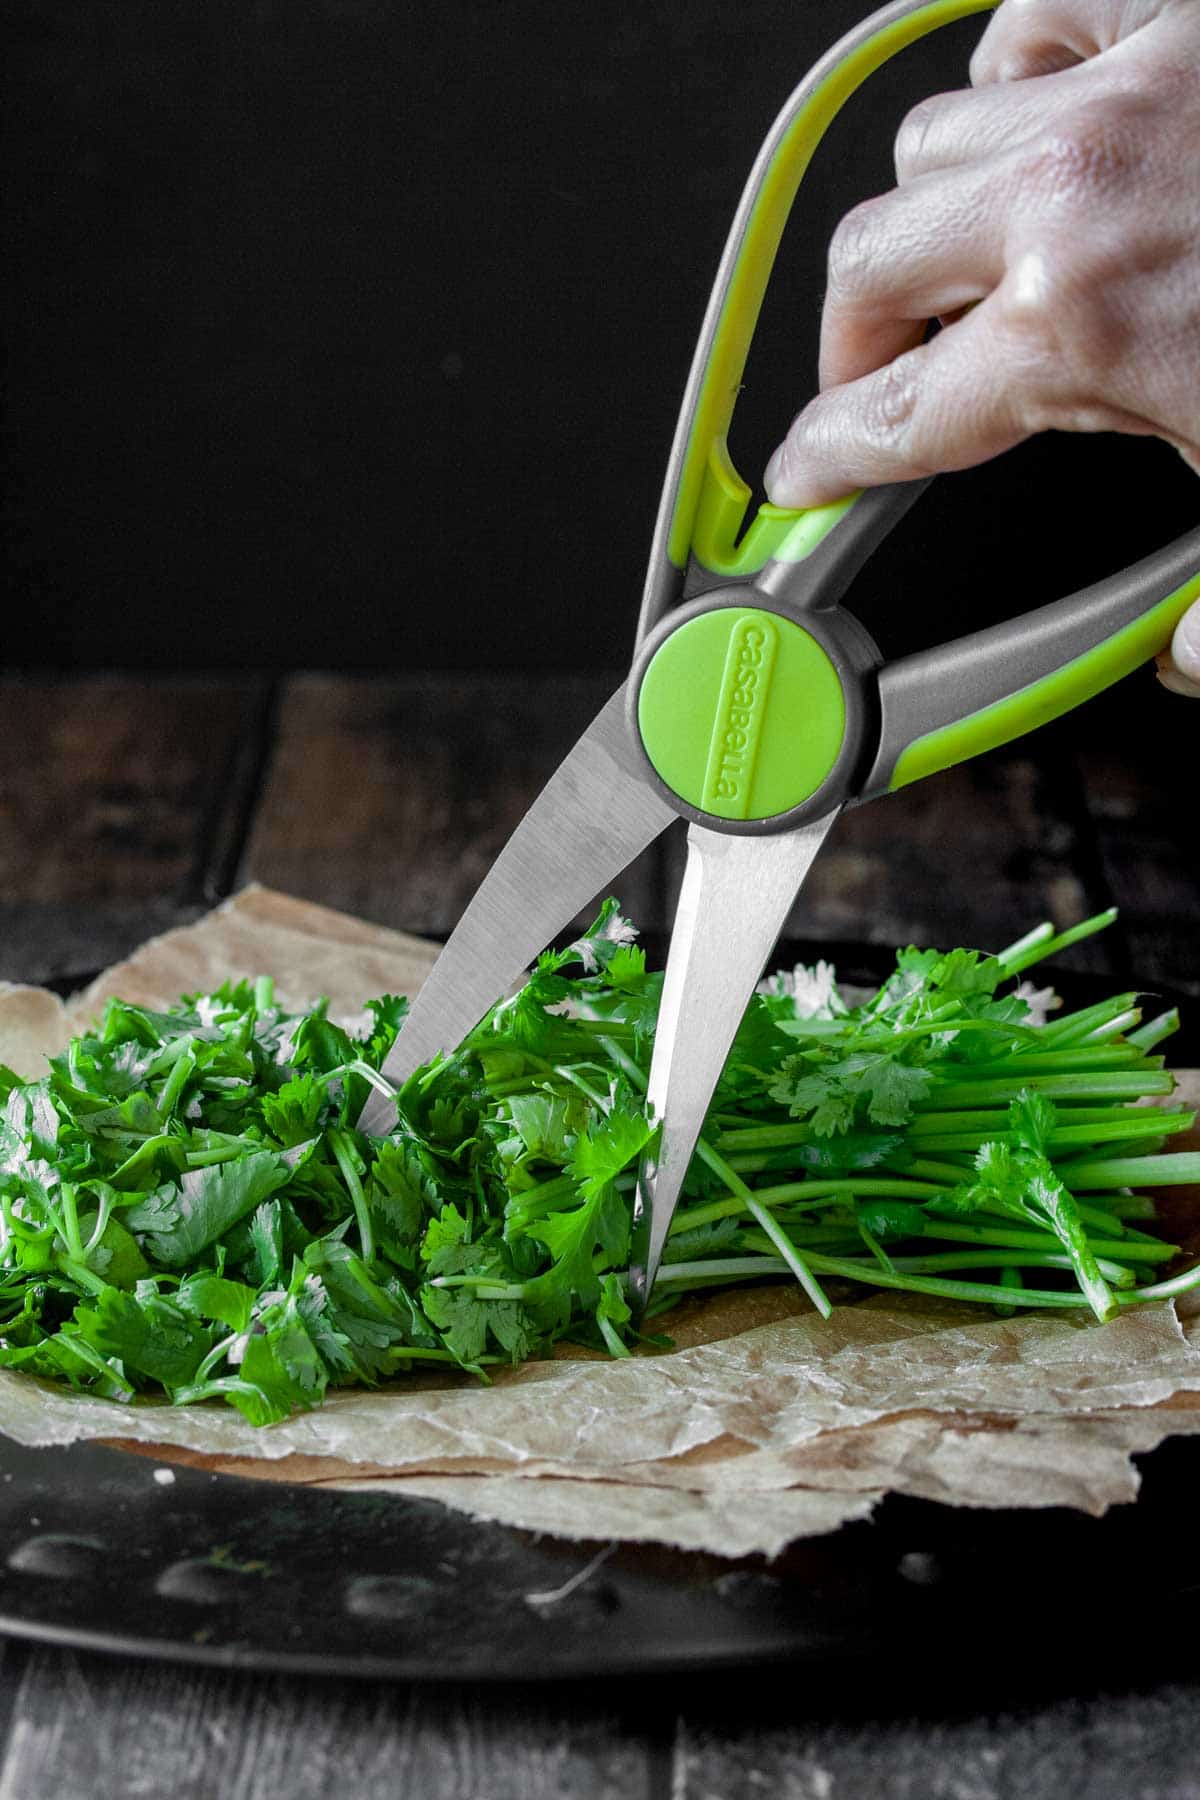 kitchen shears cutting cilantro for making a loaded guacamole dip with vegan cotija cheese